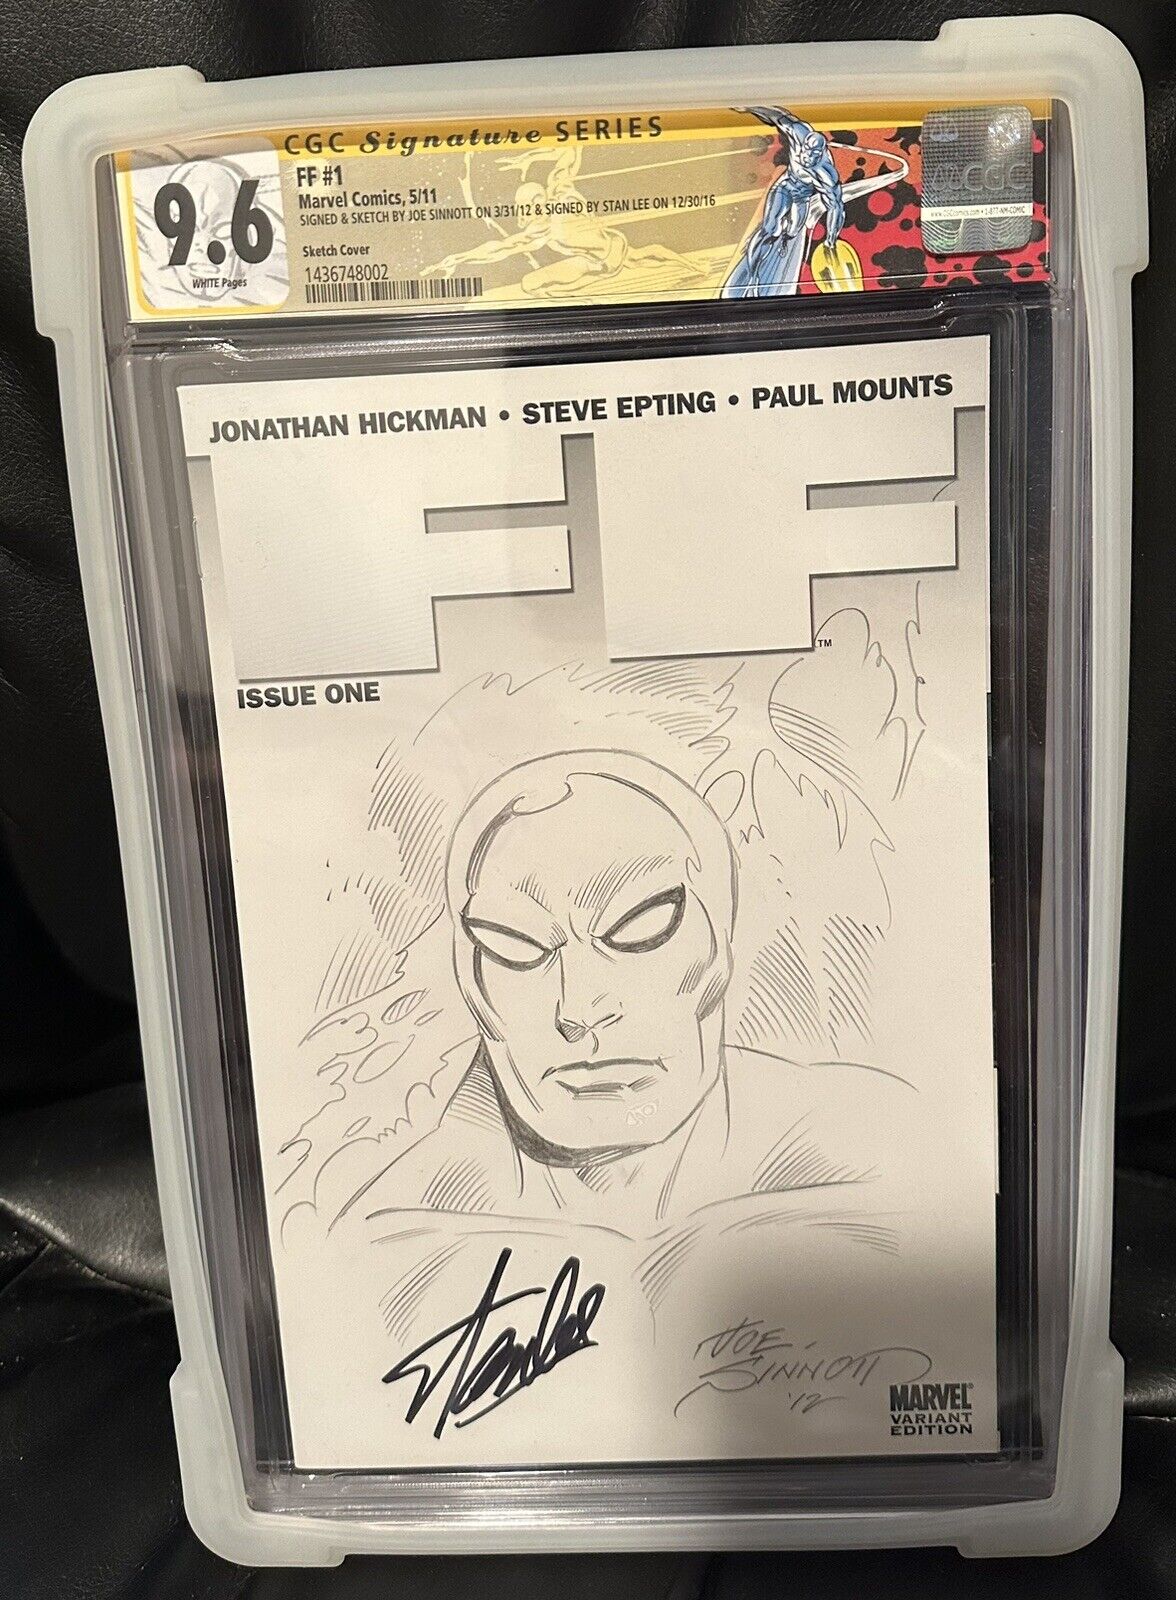 Cgc 9.6 FF#1 Silver Surfer Sketched & Signed By Joe Sinnott & Signed By Stan Lee